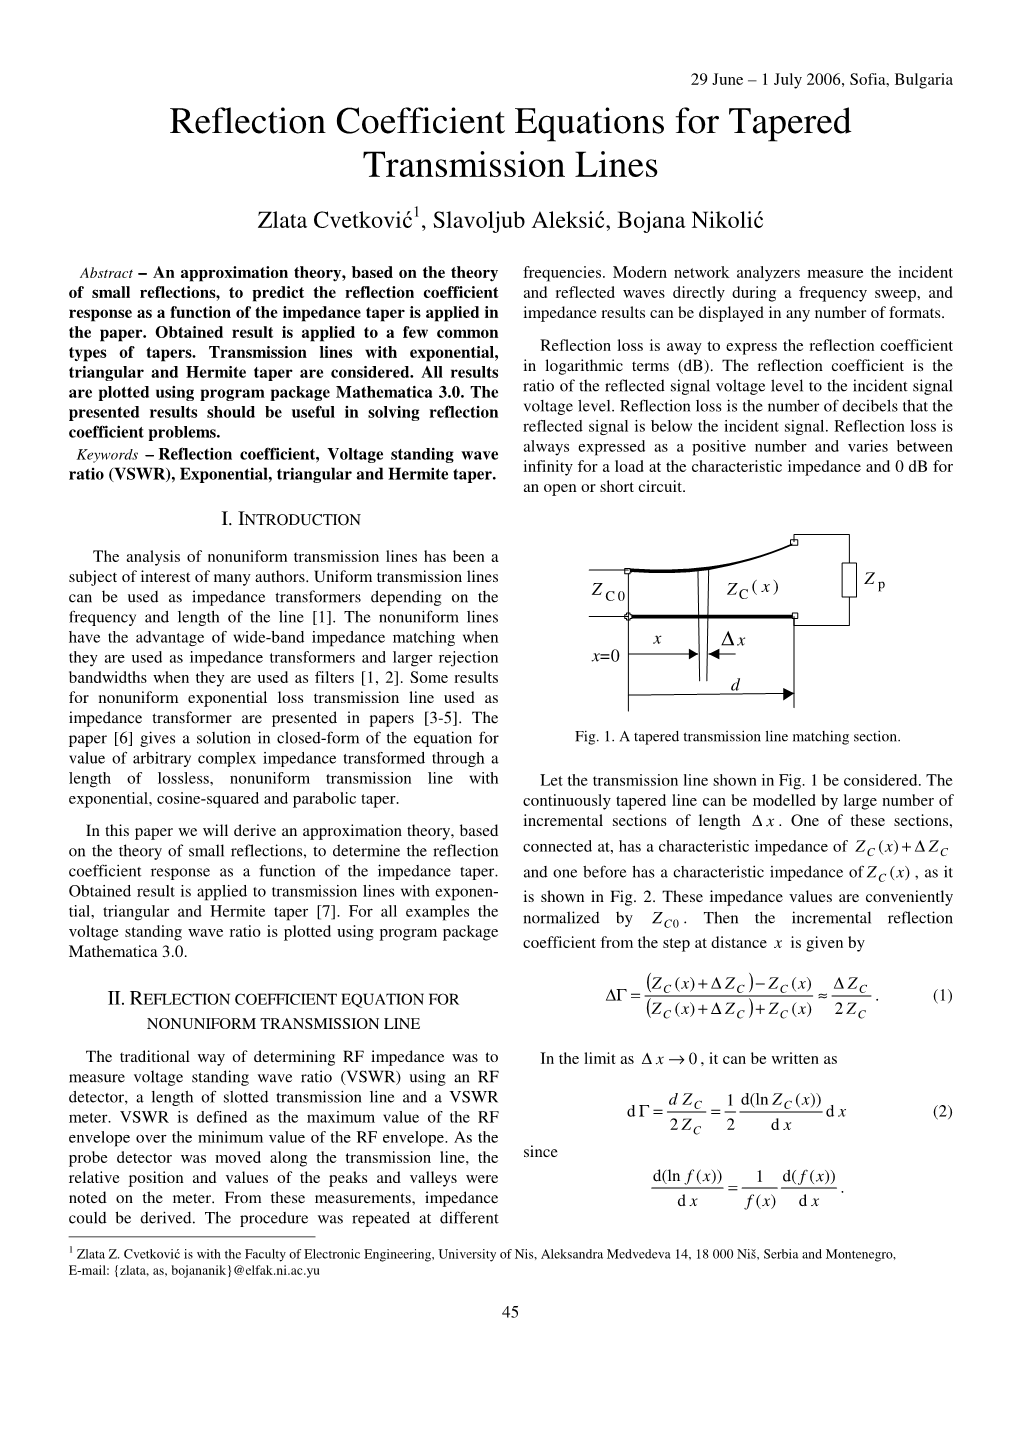 Reflection Coefficient Equations for Tapered Transmission Lines